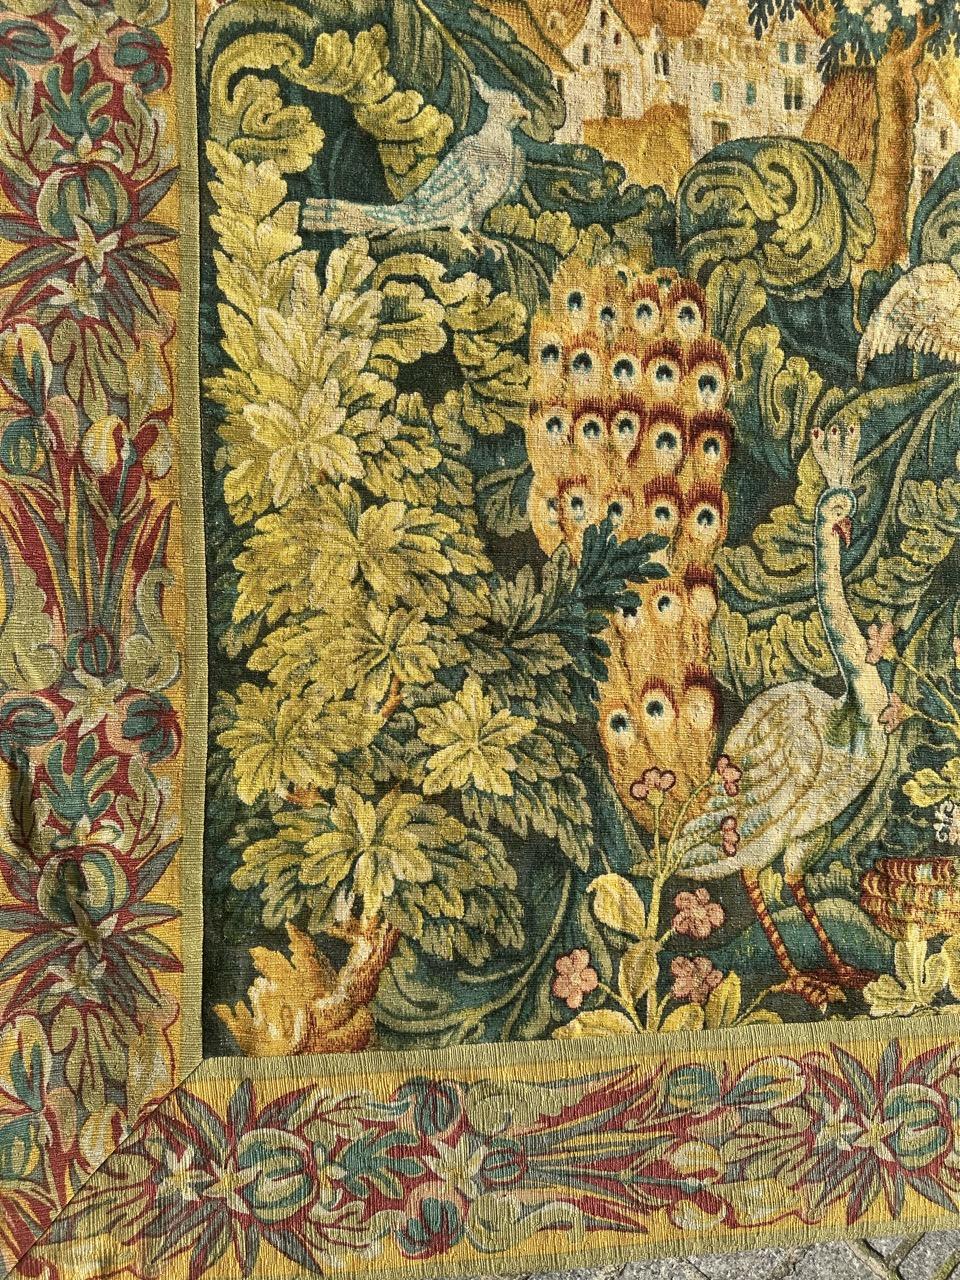 Introduce timeless charm into your space with this exquisite wool and linen tapestry from the renowned Robert Four manufacture in Aubusson, France. A vintage replica of a 15th-century masterpiece titled 